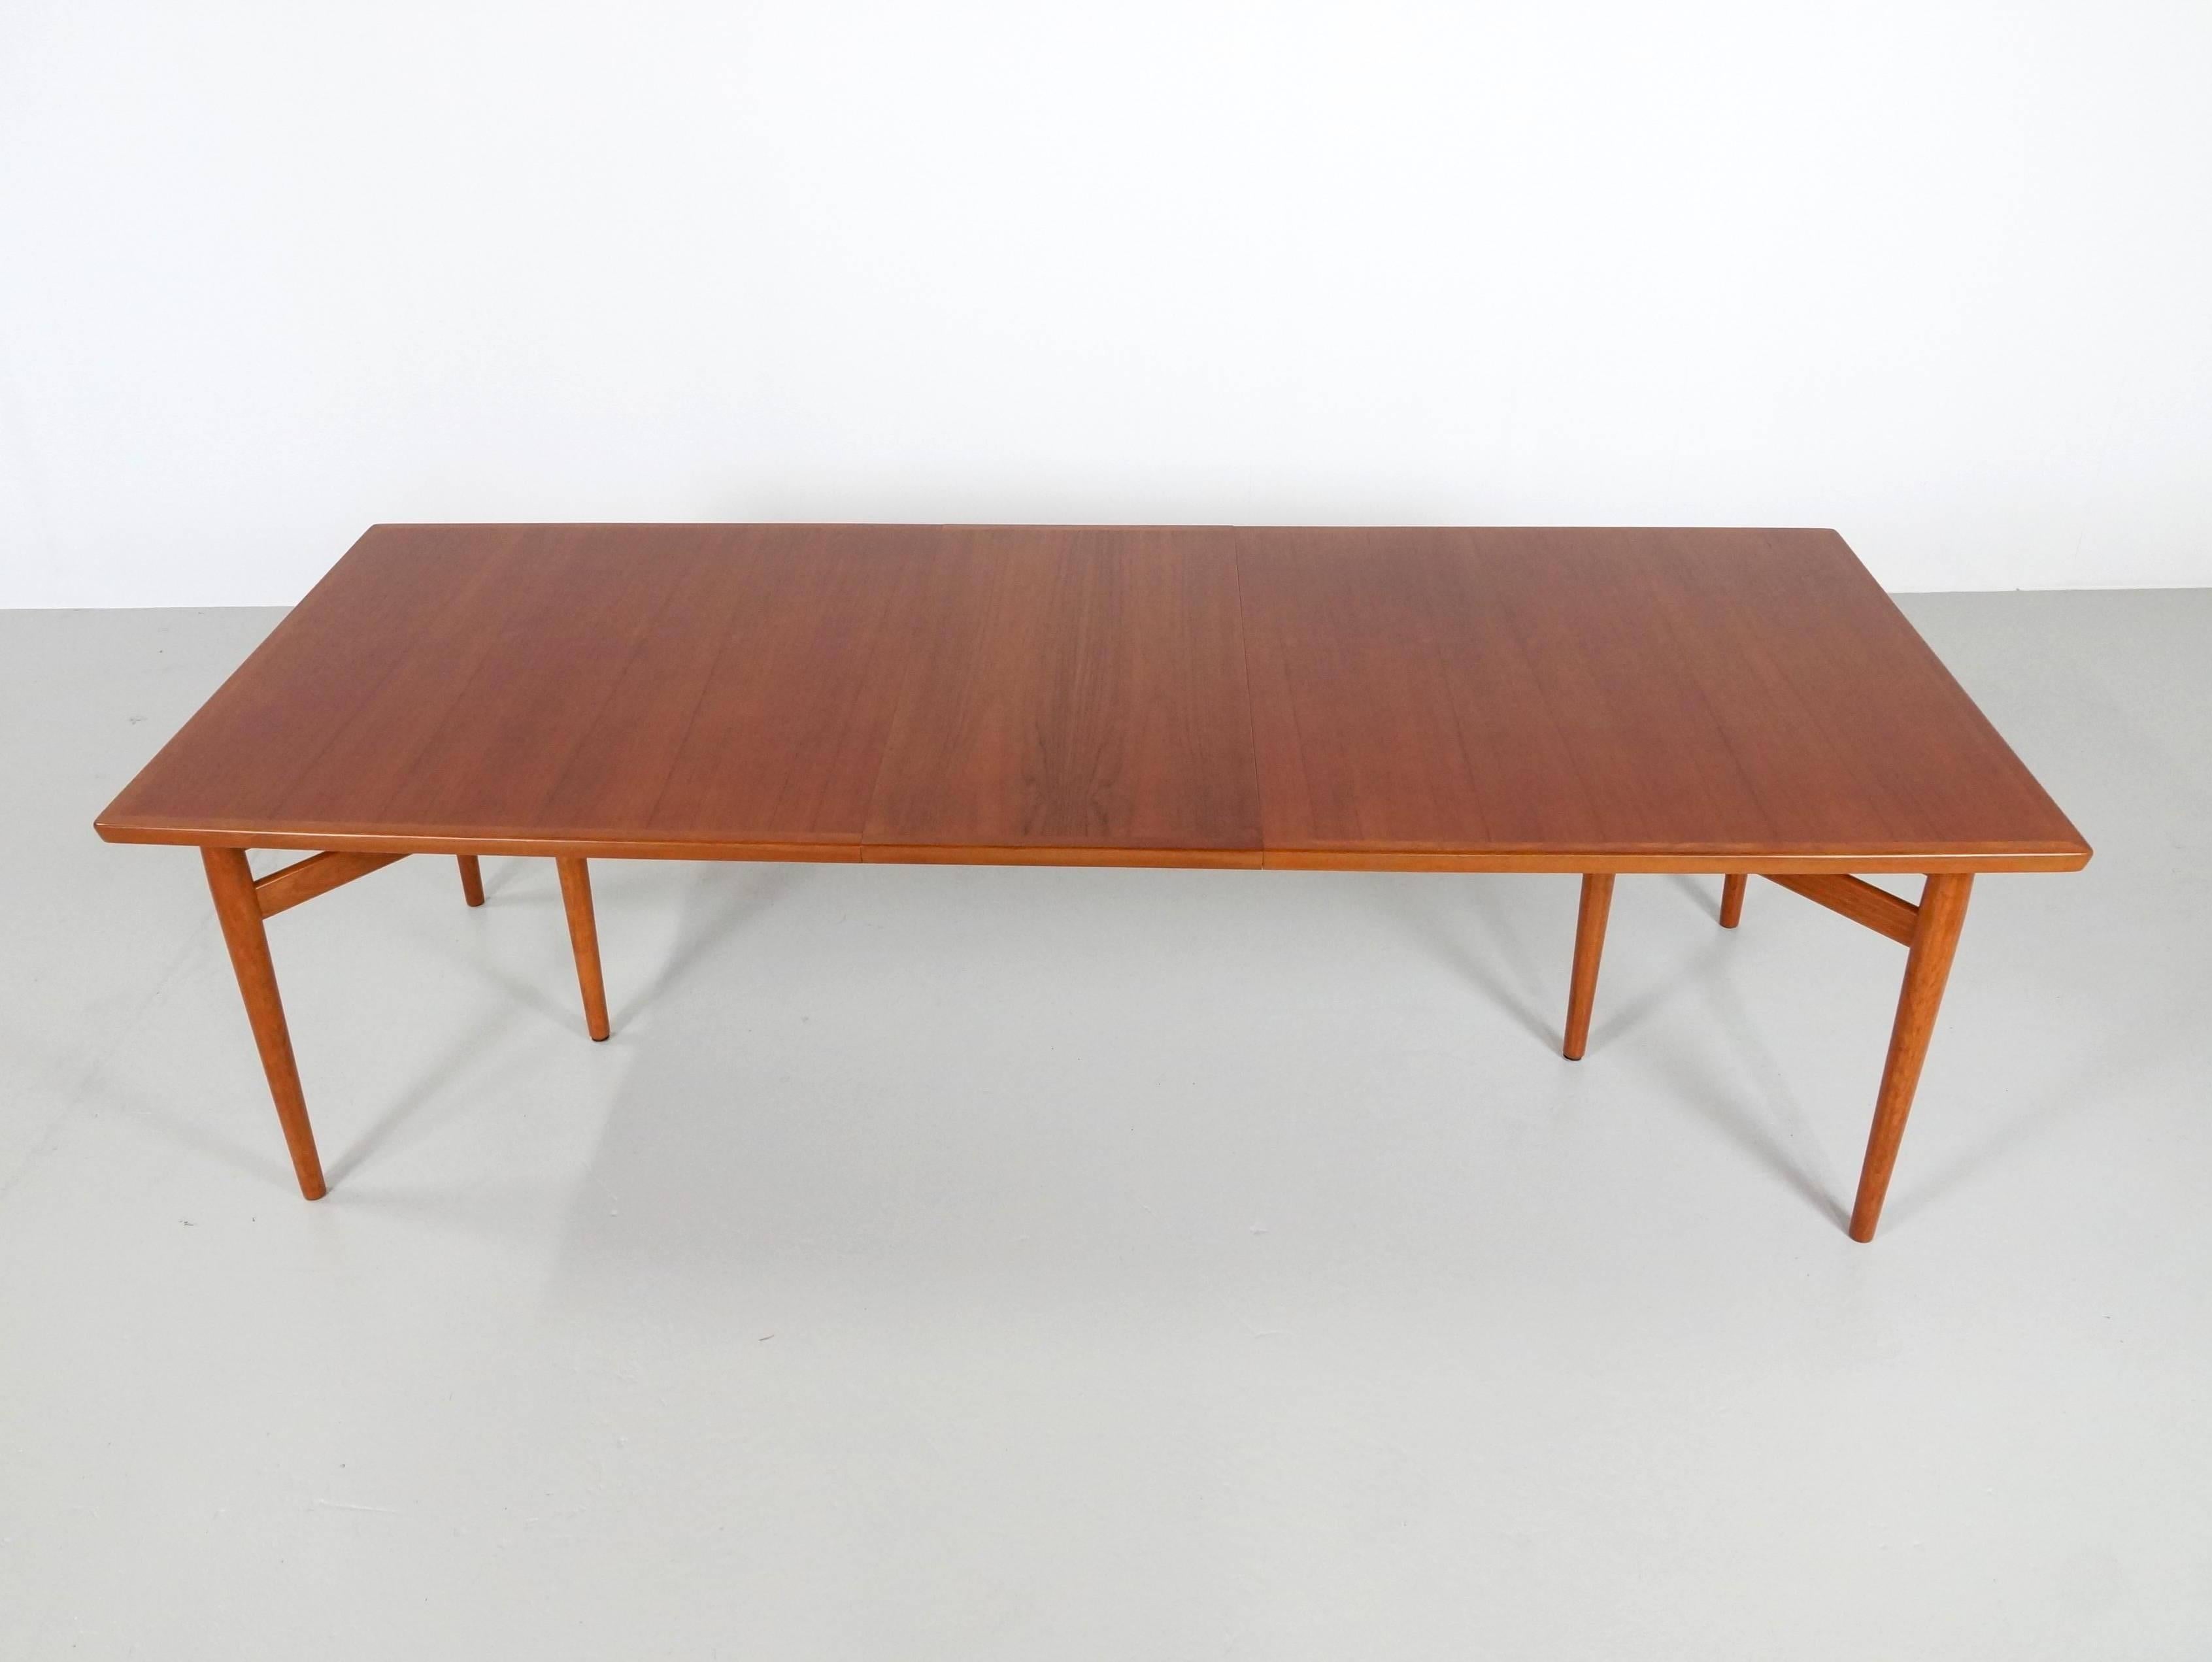 Six legged extendable teak table designed by Arne Vodder for Sibast. This six legged table is in perfect condition. The top has been professionally re-lacquered for a new life and optimal use without stains. The top is extendable and in normal